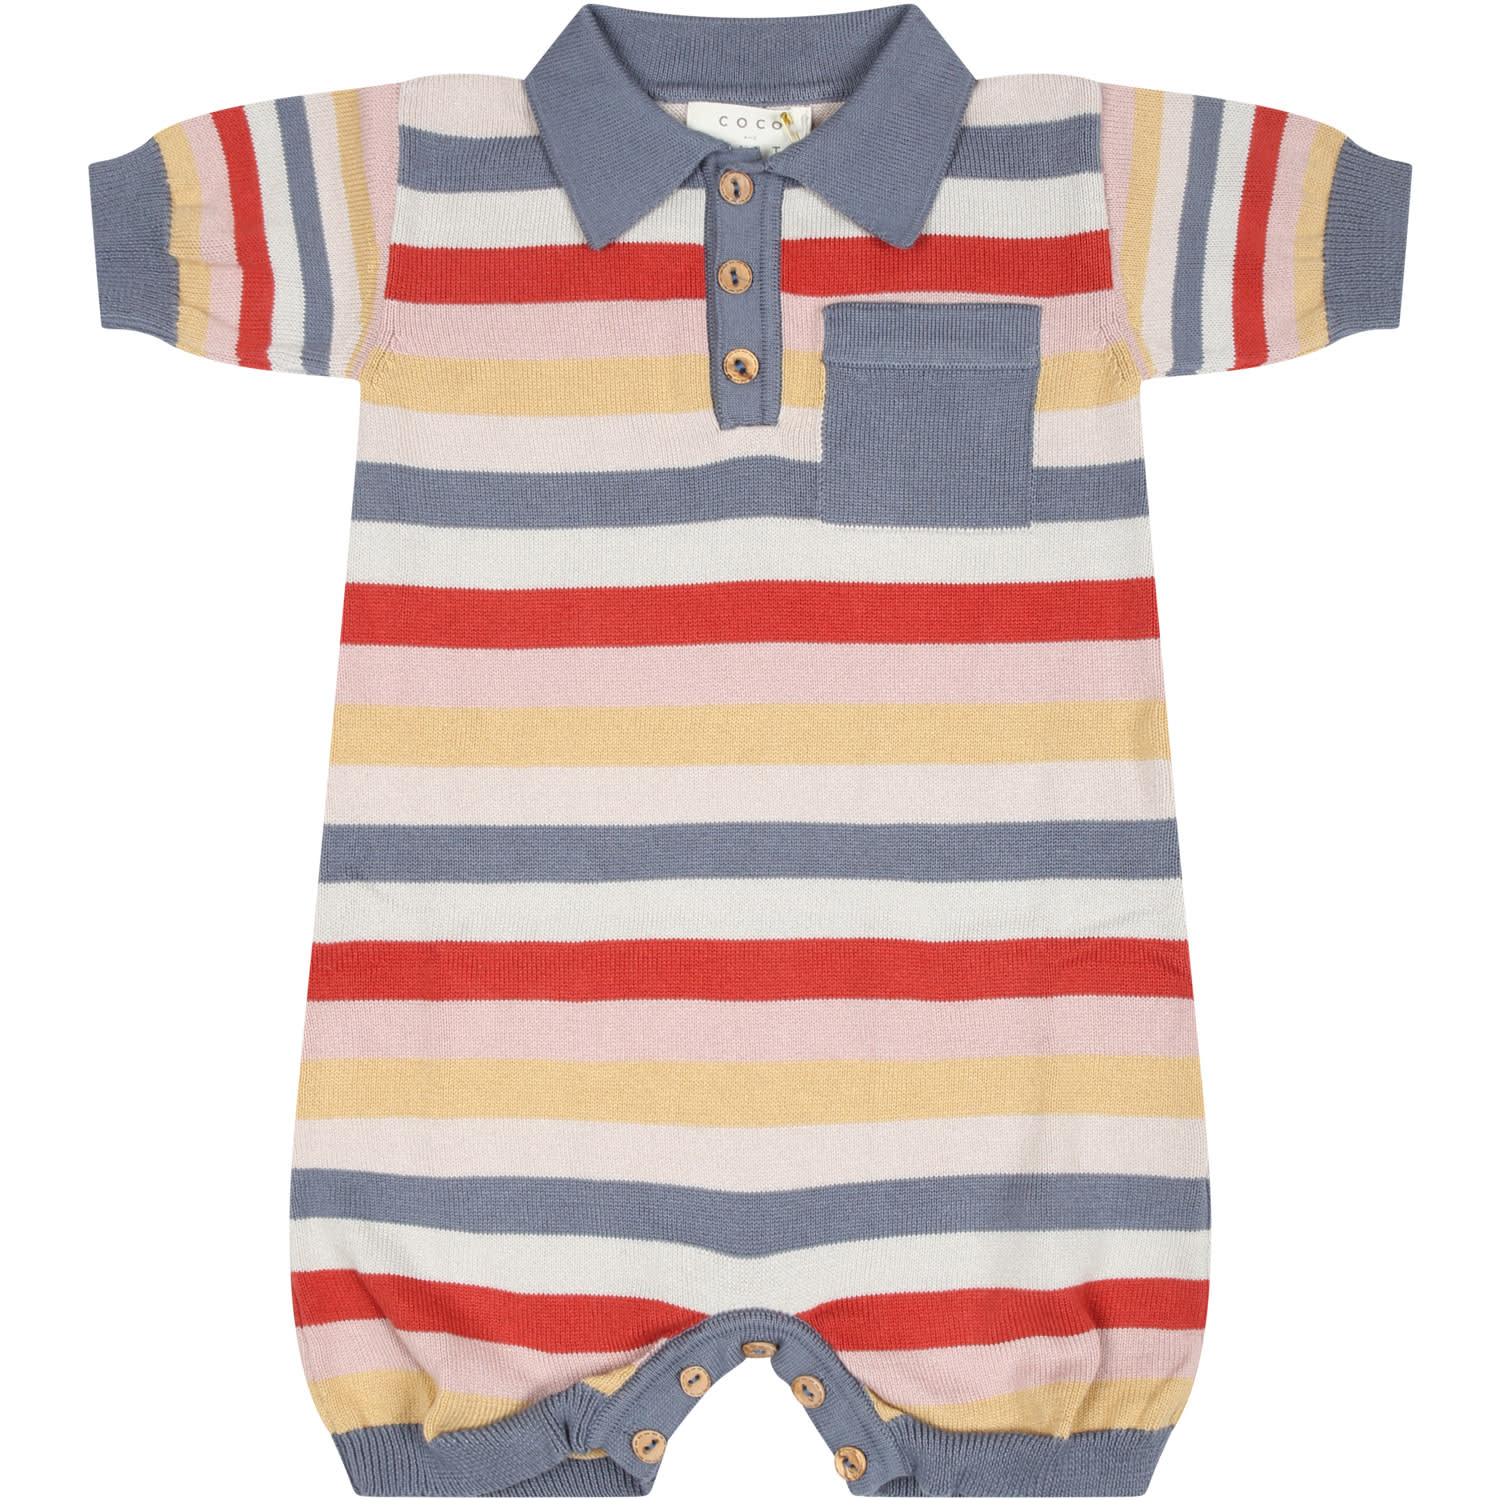 Shop Coco Au Lait Multicolor Romper For Baby Boy With Striped Pattern